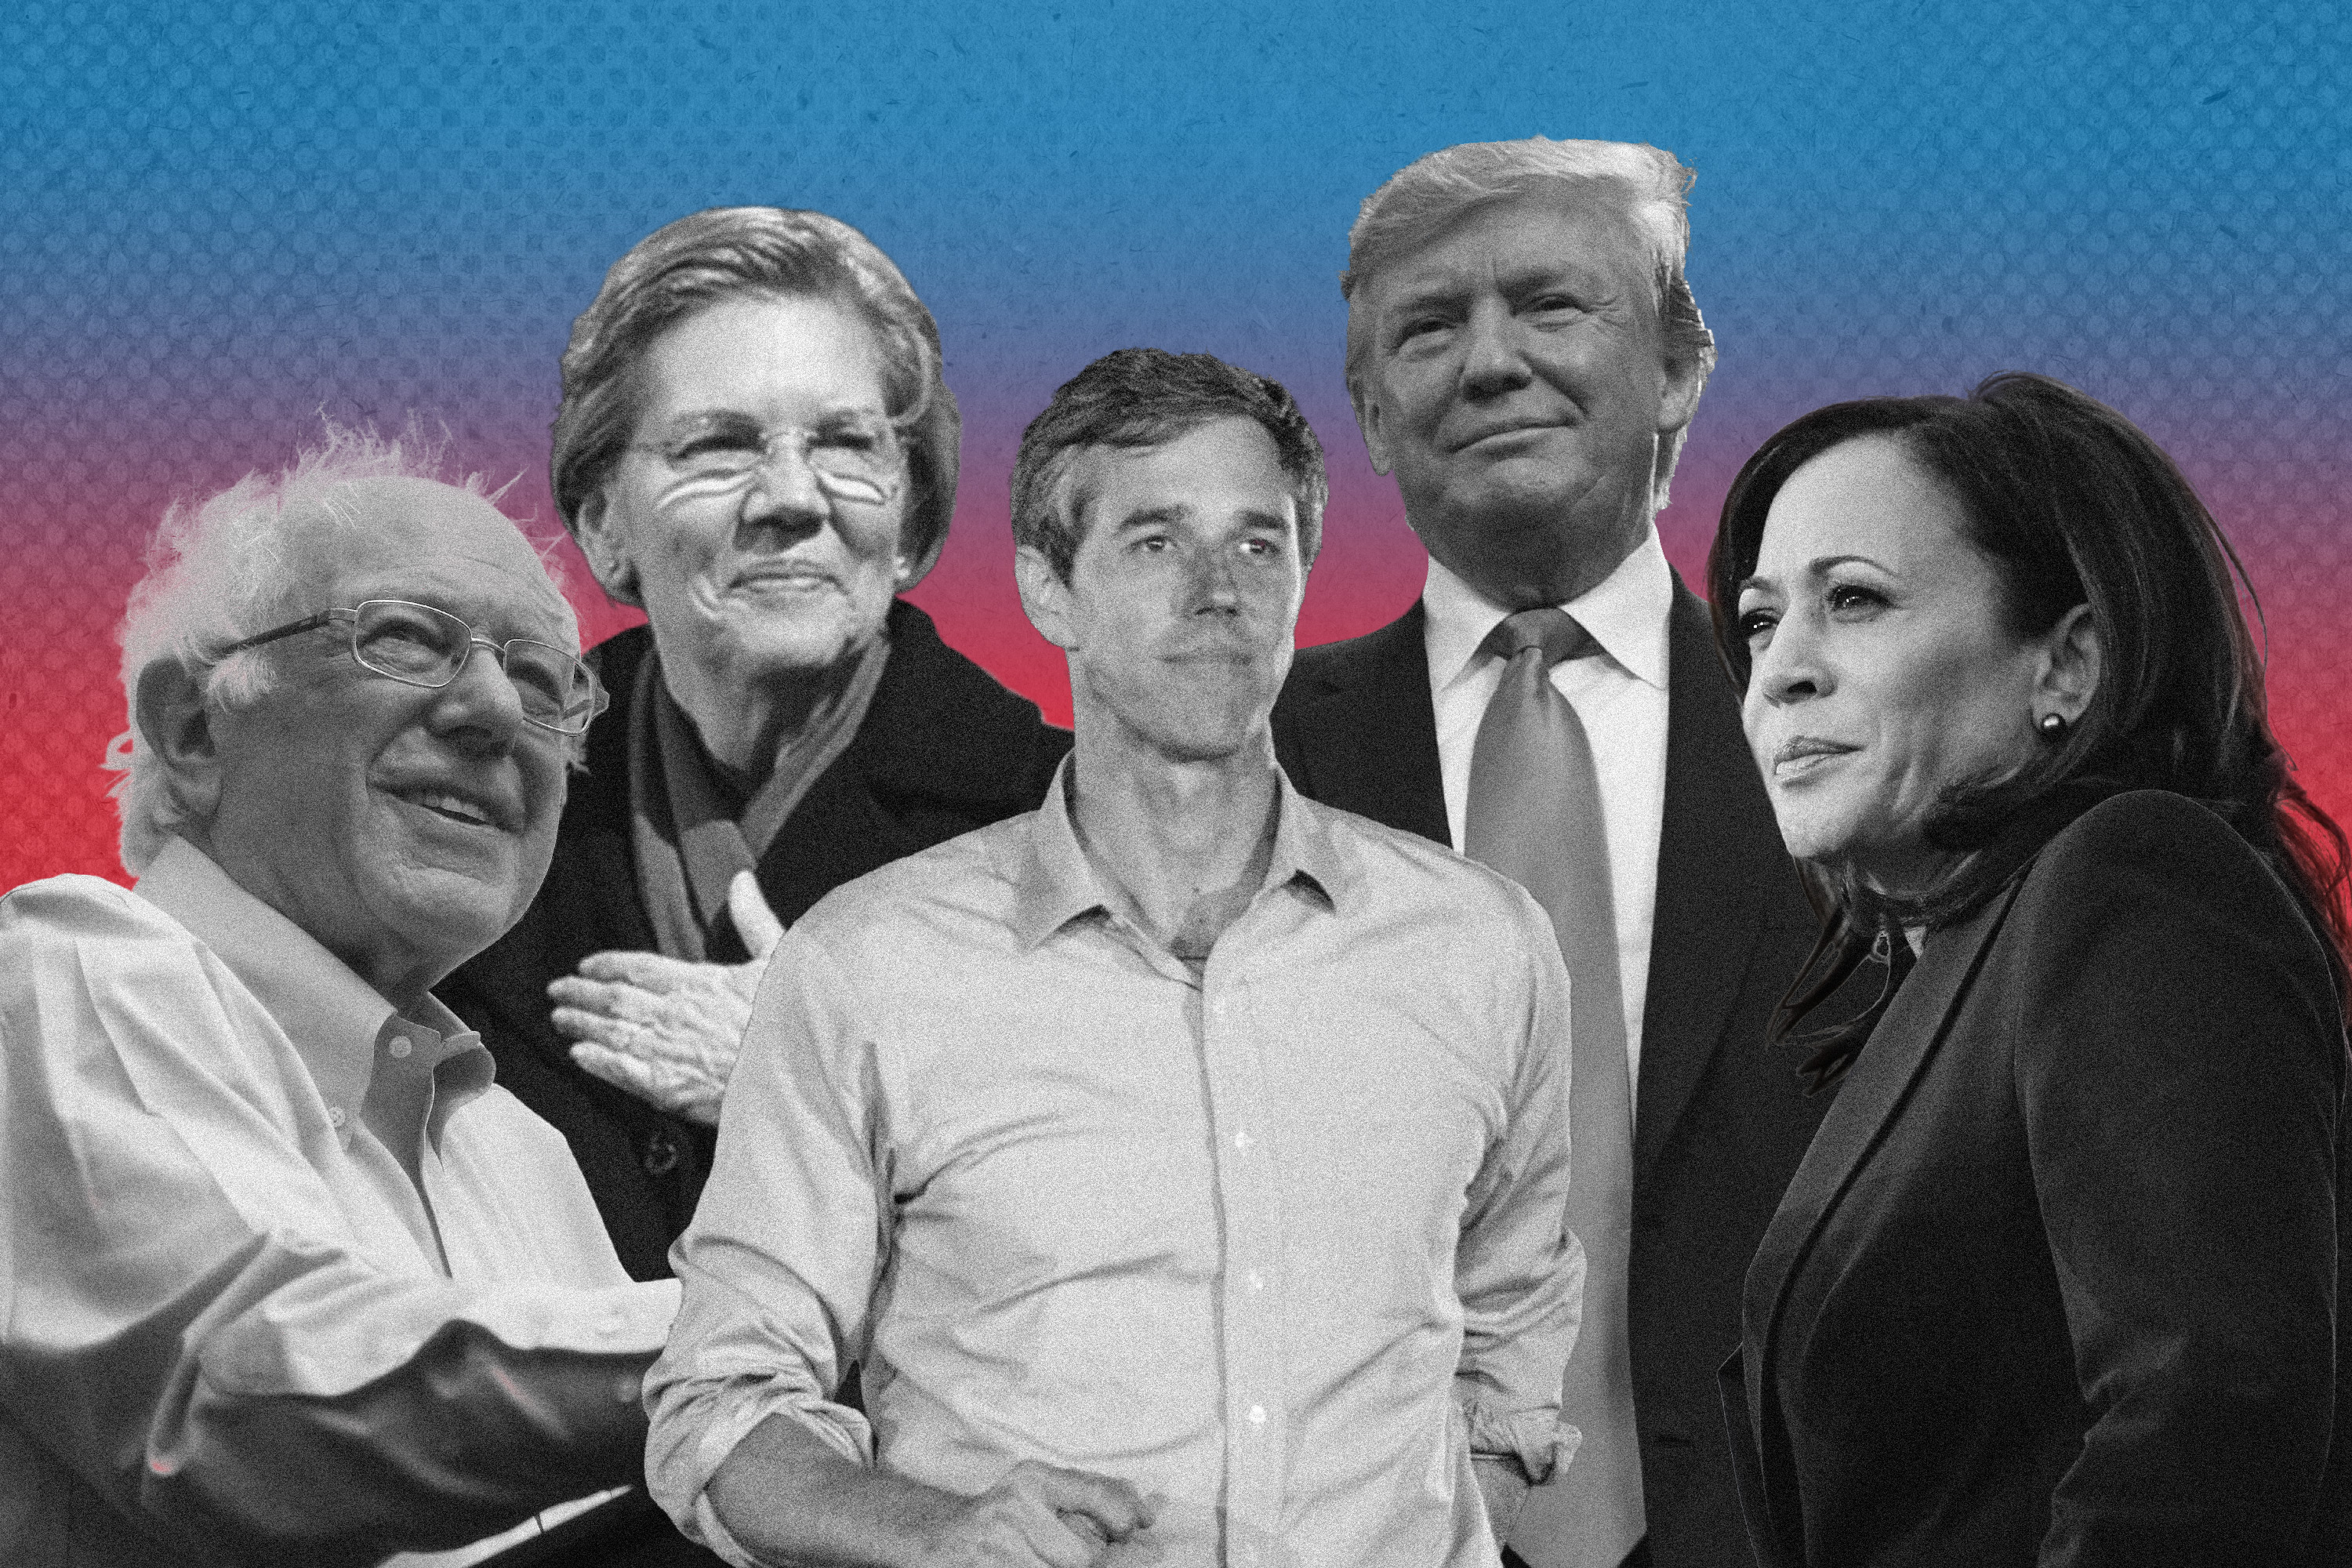 Here’s Where to Find Every 2020 Presidential Candidate’s Tax Returns (If They’ve Released Them)